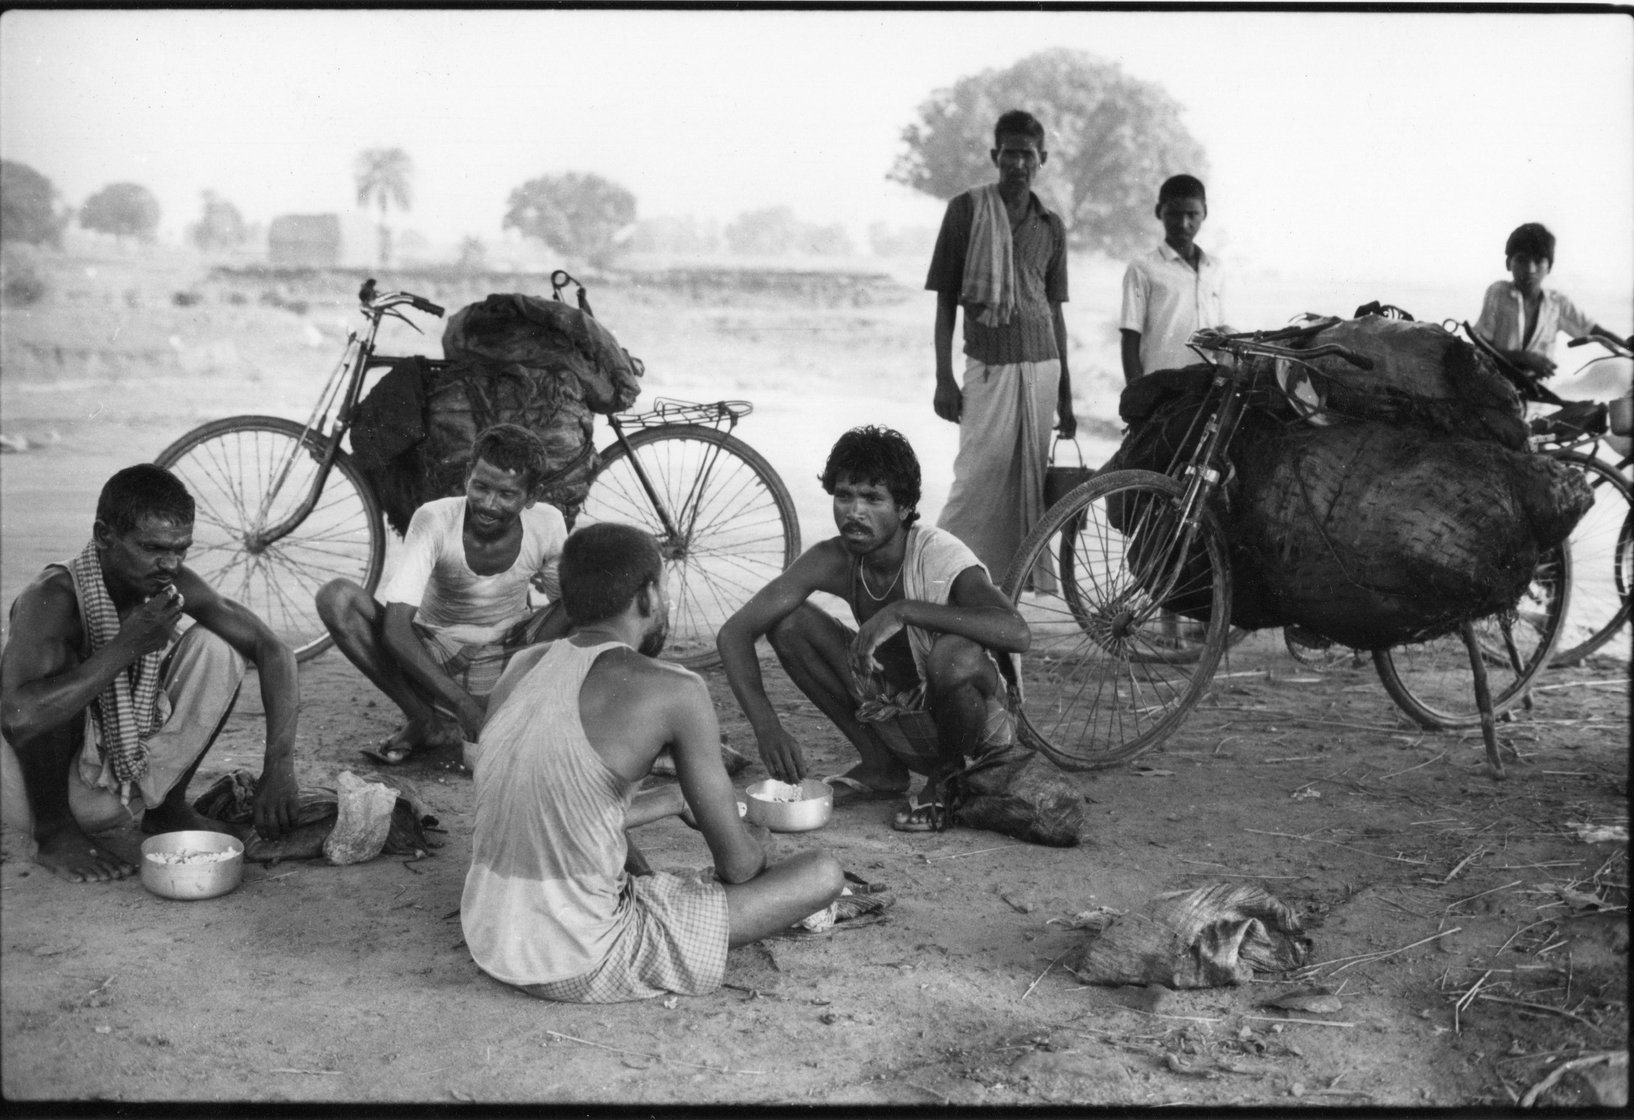 Group of men from different castes eating lunch beside their coal laden cycles